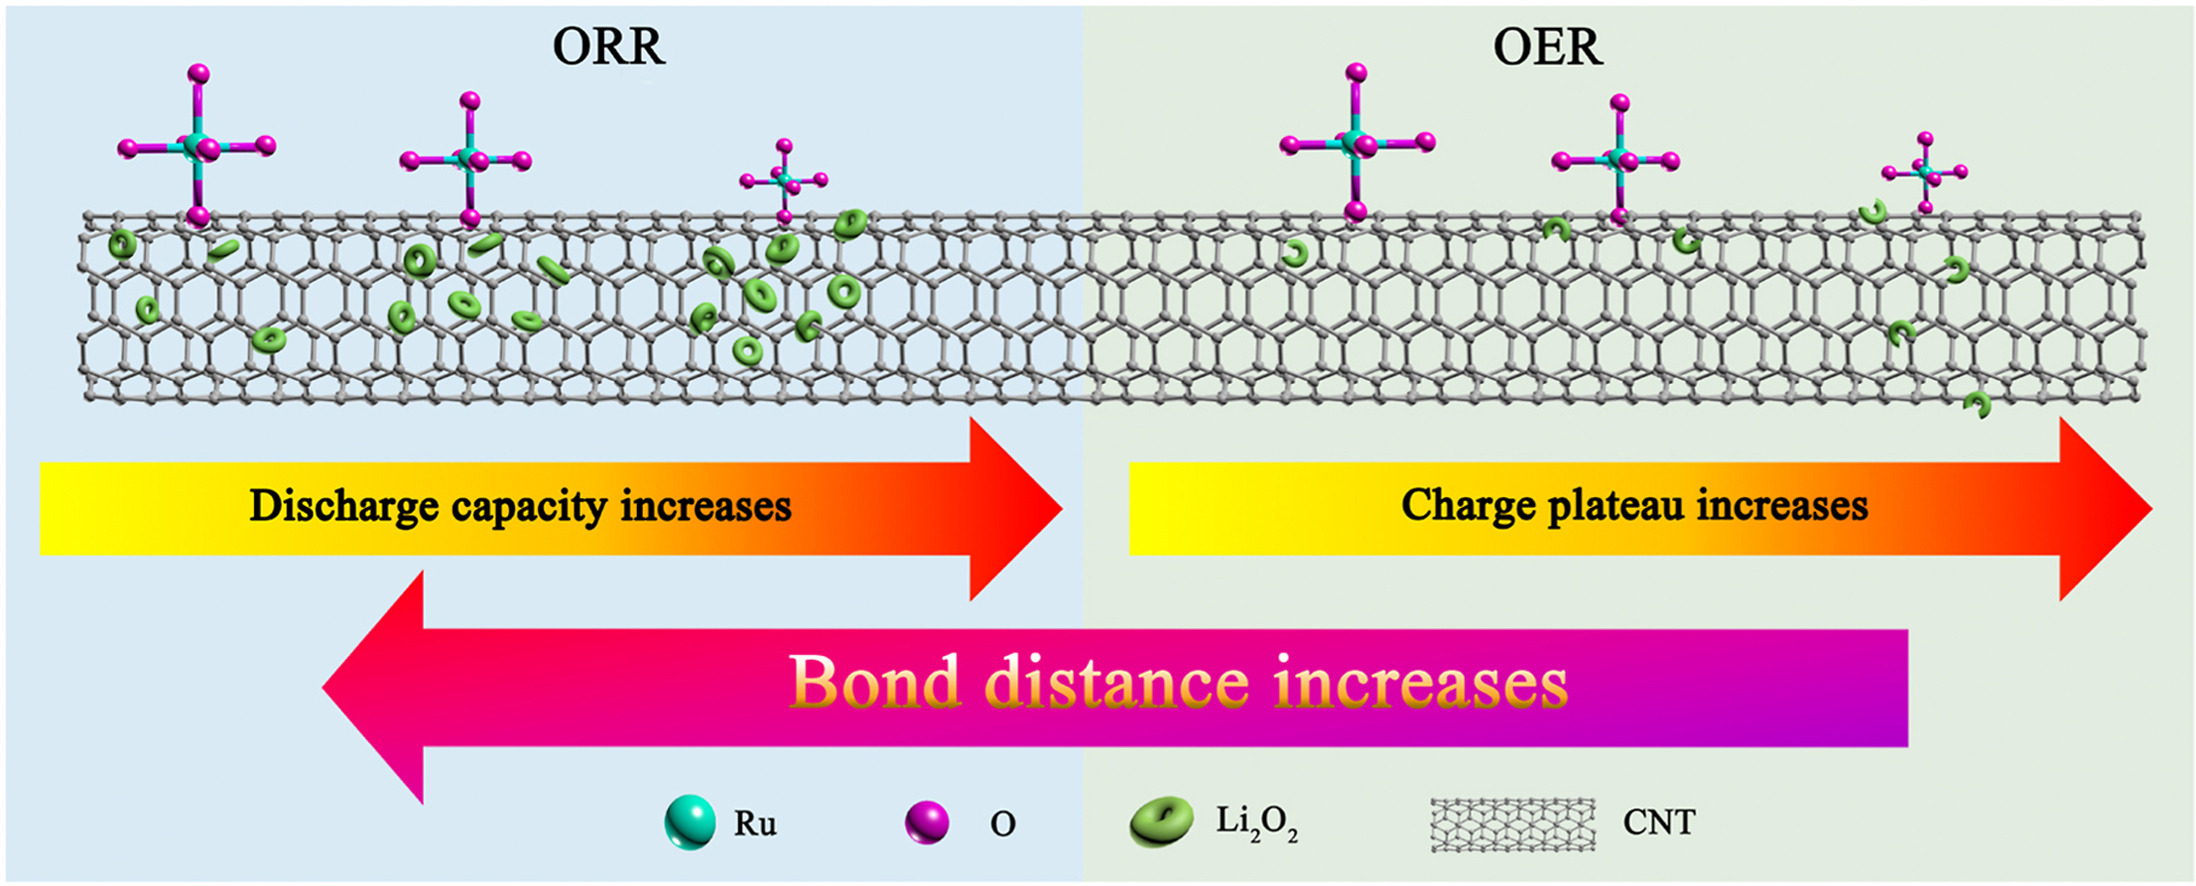 Balancing oxygen evolution reaction and oxygen reduction reaction processes in Li–O2 batteries through tuning the bond distances of RuO2